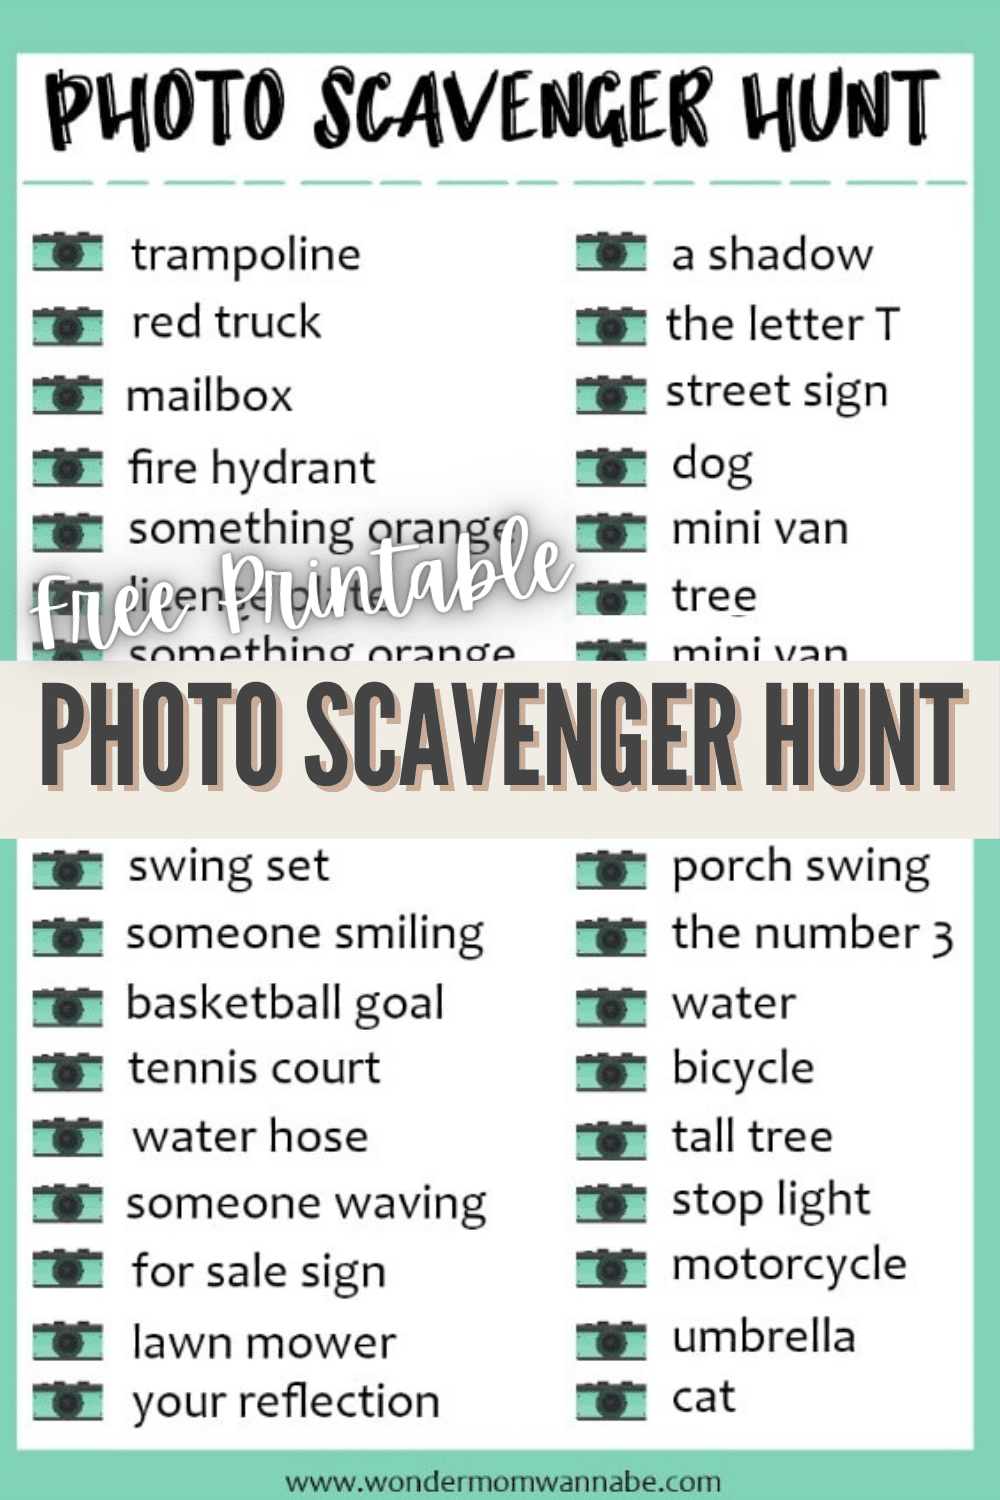 A photo scavenger hunt is a great activity for kids and adults. You can print off this free printable photo scavenger hunt list and play over and over. #scavengerhunt #printables #activitiesforkids via @wondermomwannab